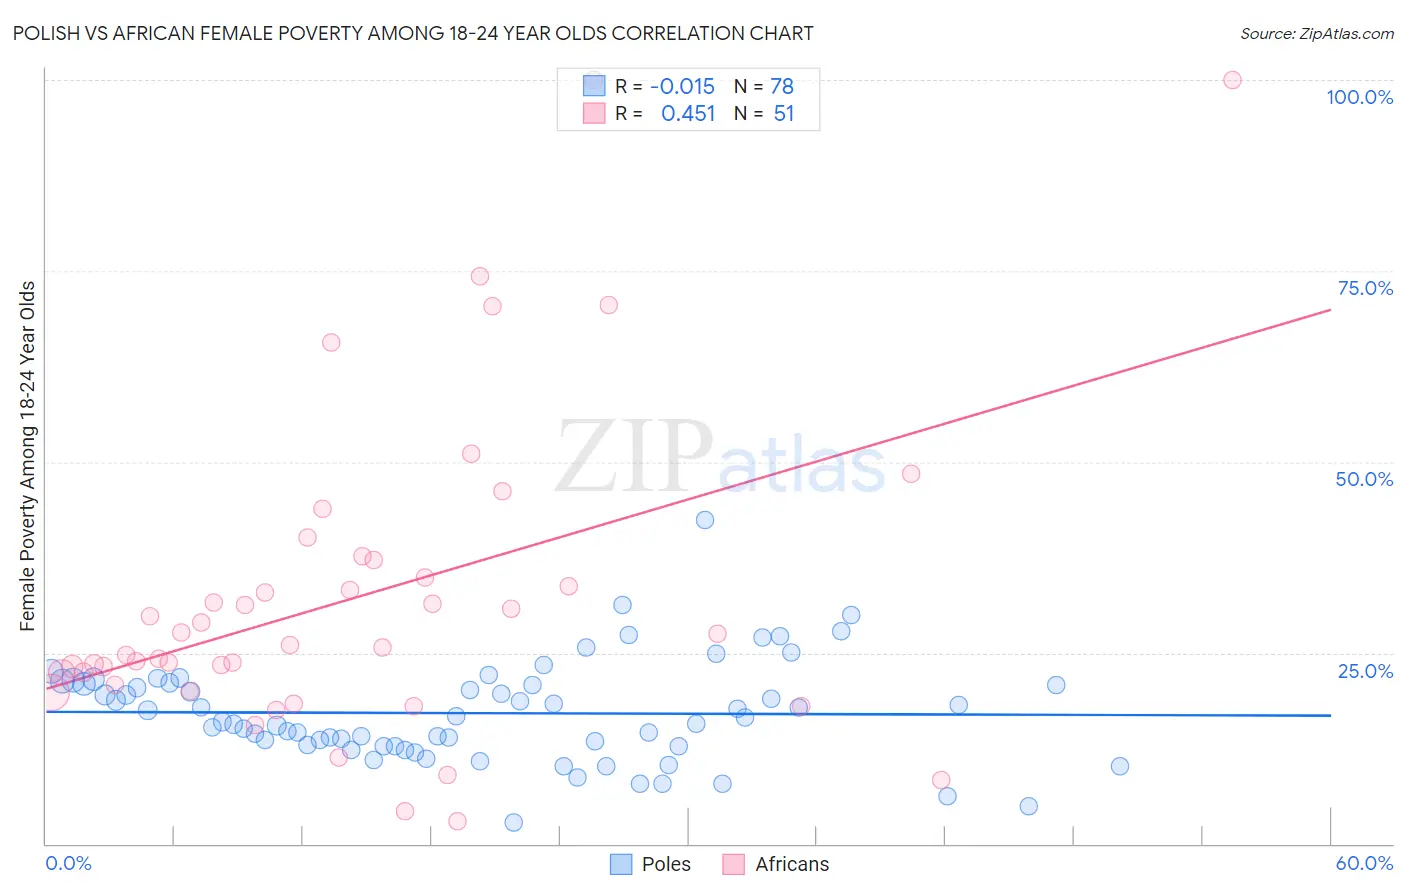 Polish vs African Female Poverty Among 18-24 Year Olds